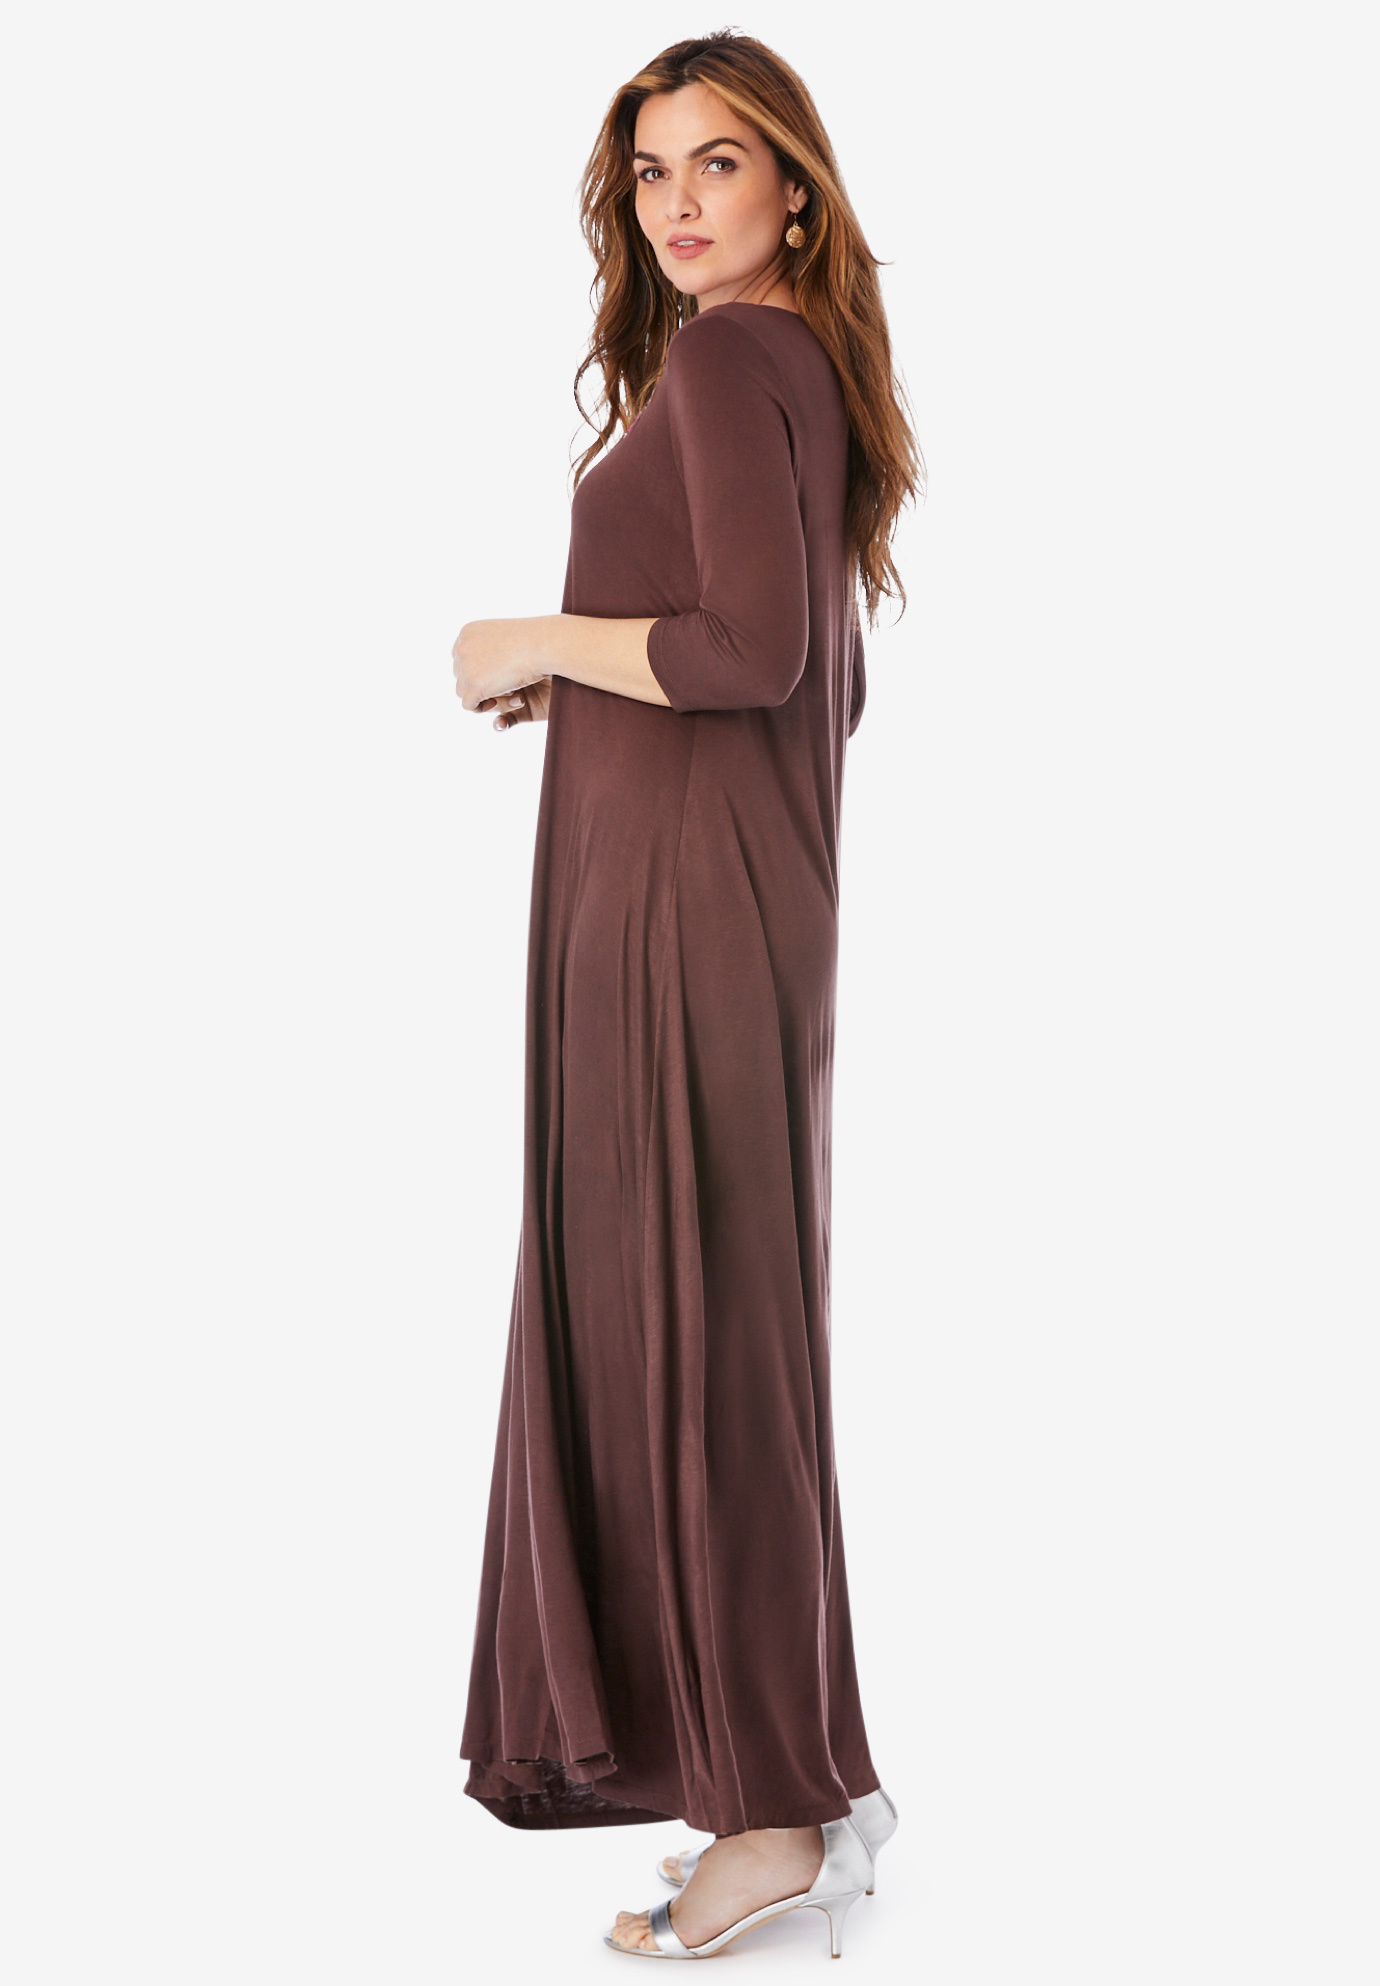 Embroidered Maxi Dress | Fullbeauty Outlet